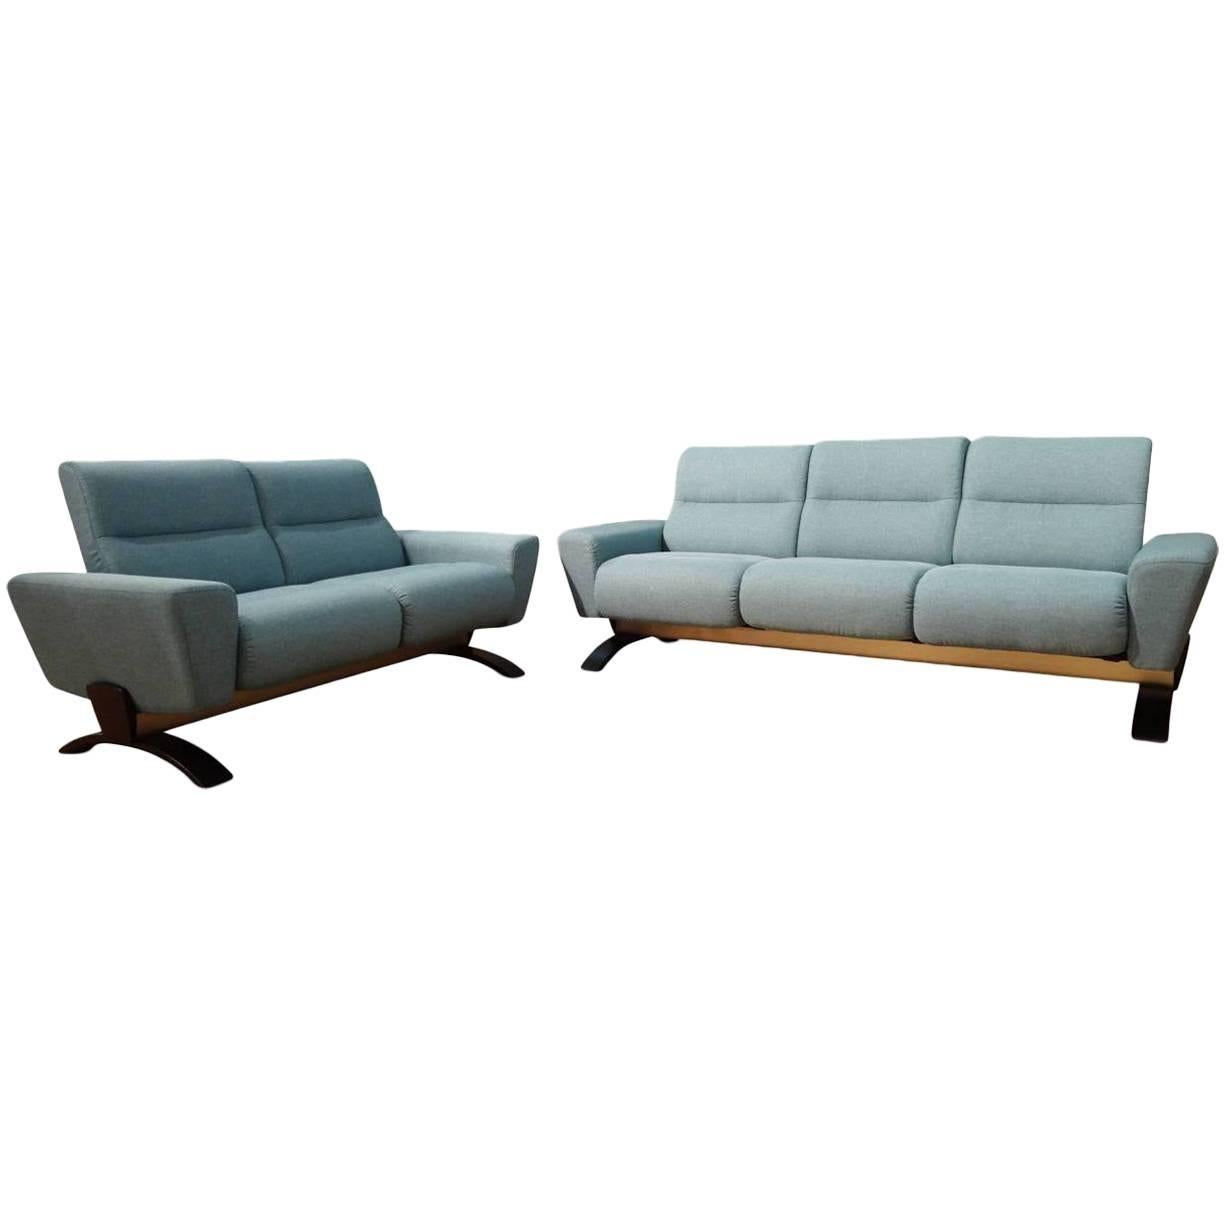 Sofa Set "You Julia" by Manufacturer Ekorenes Stressless in Beechwood and Fabric